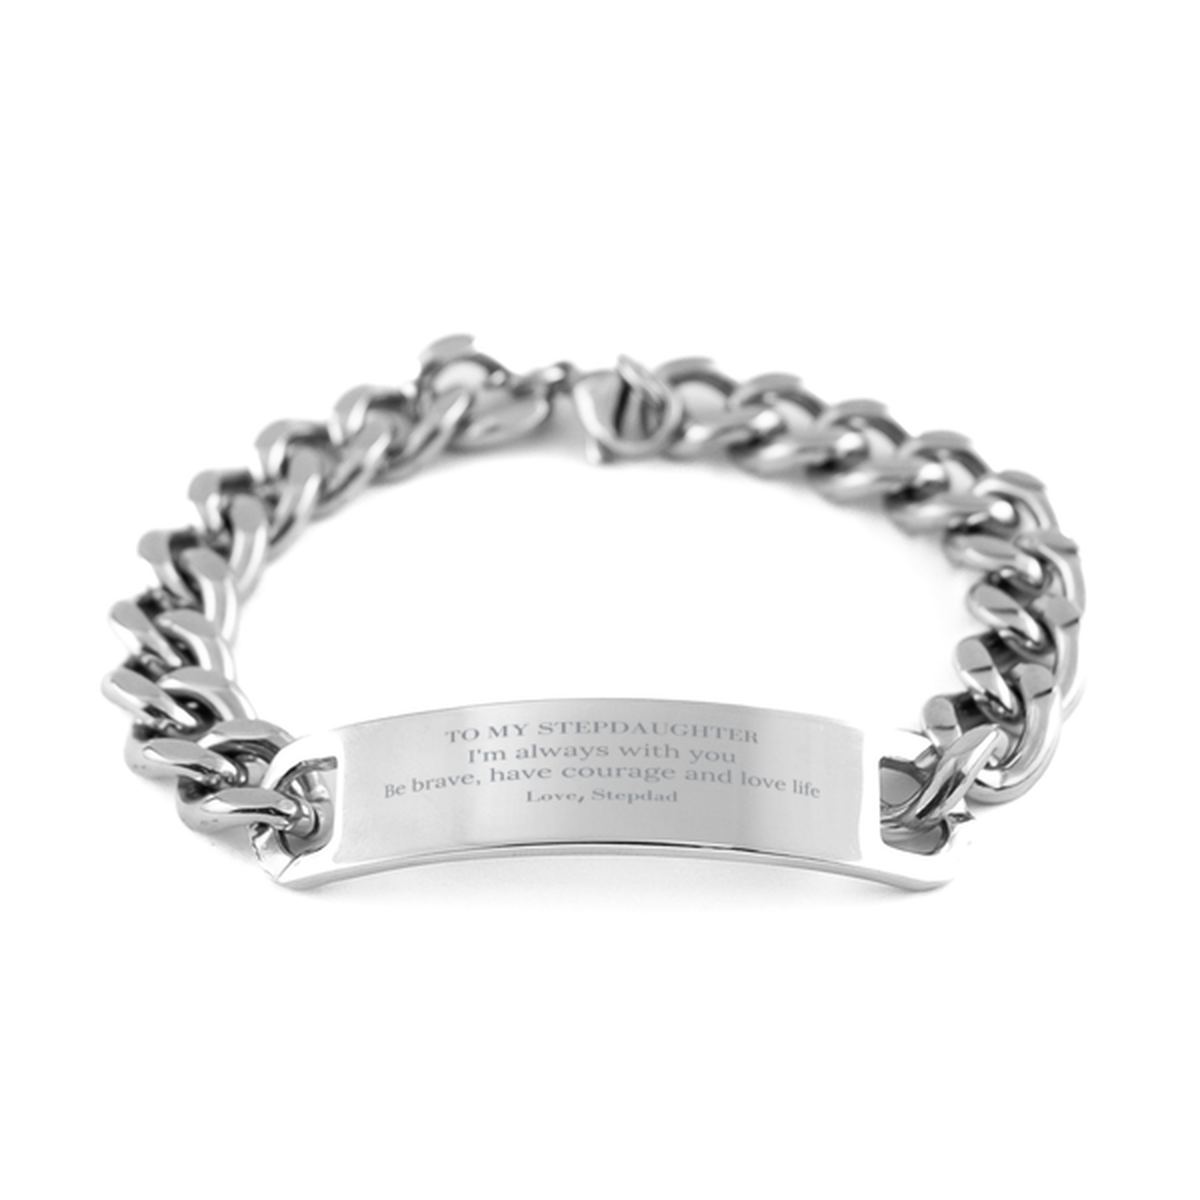 To My Stepdaughter Gifts from Stepdad, Unique Cuban Chain Stainless Steel Bracelet Inspirational Christmas Birthday Graduation Gifts for Stepdaughter I'm always with you. Be brave, have courage and love life. Love, Stepdad